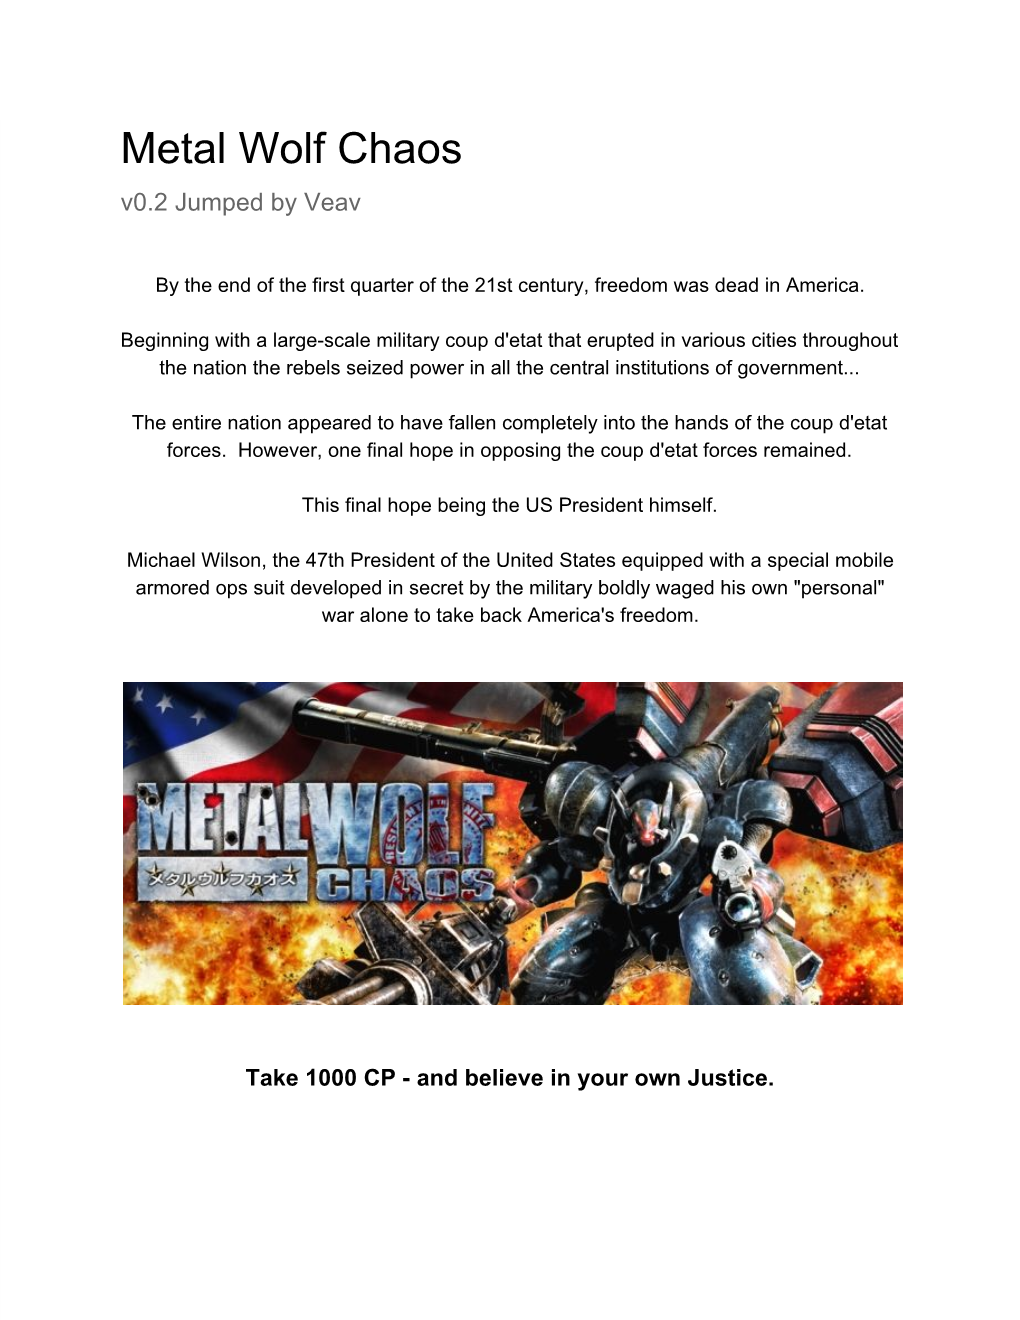 Metal Wolf Chaos V0.2 Jumped by Veav